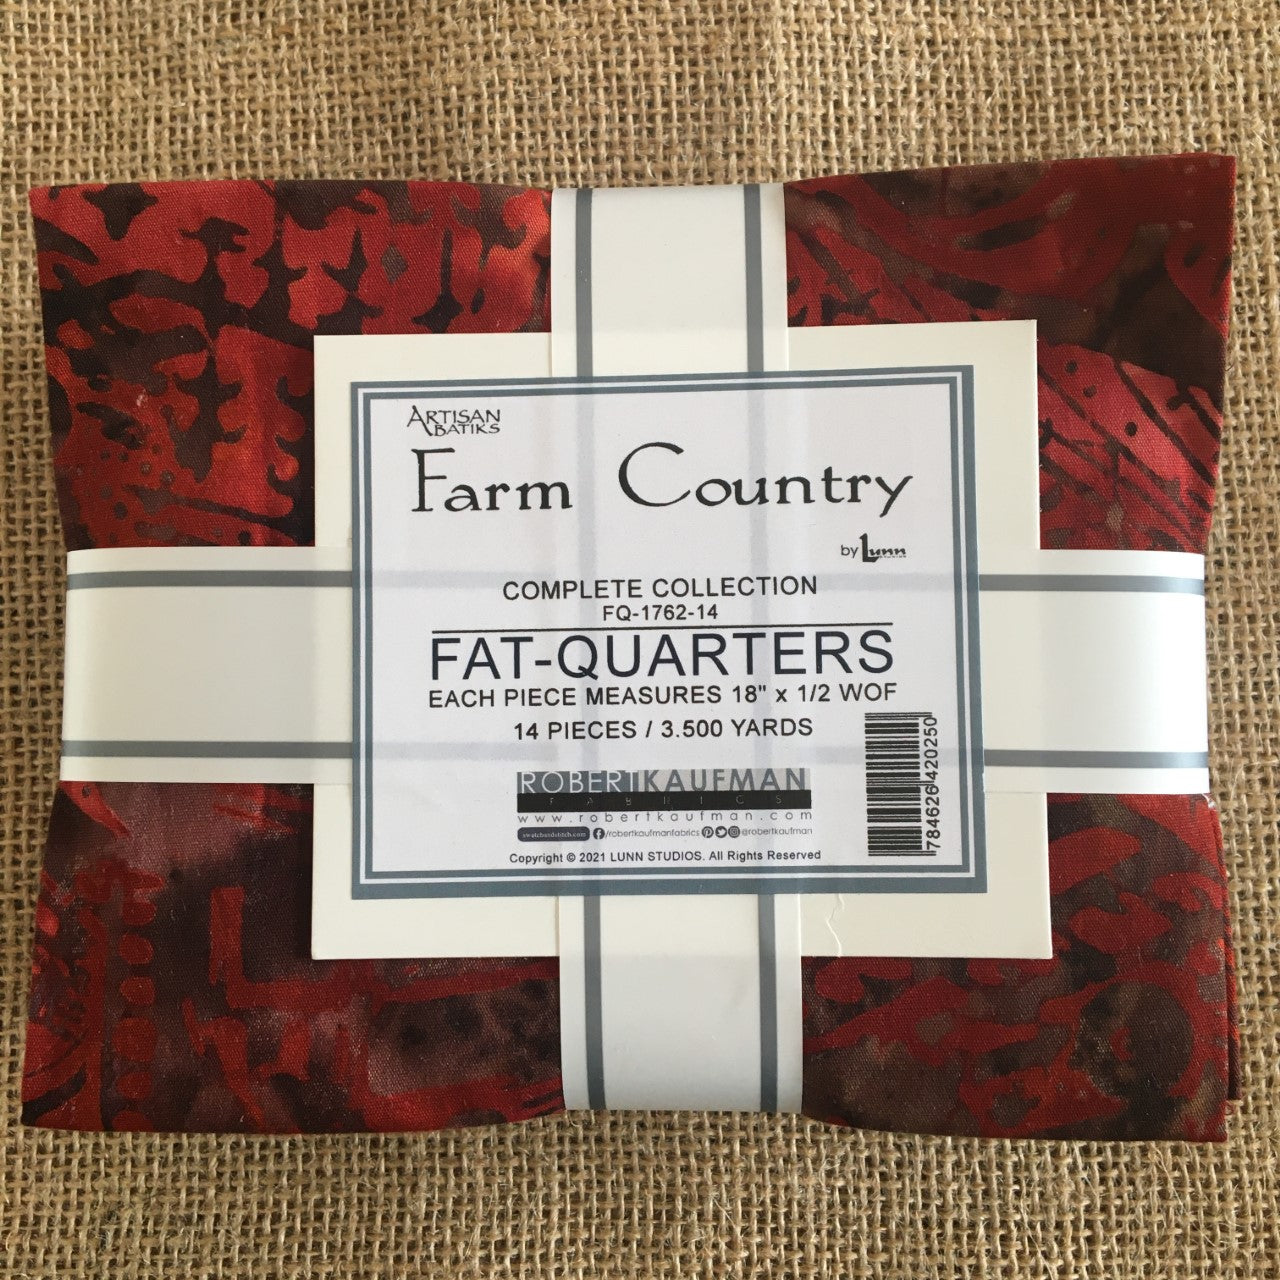 Artisan Batiks Farm Country Collection - 14 Fat Quarters Pack Bargain Priced